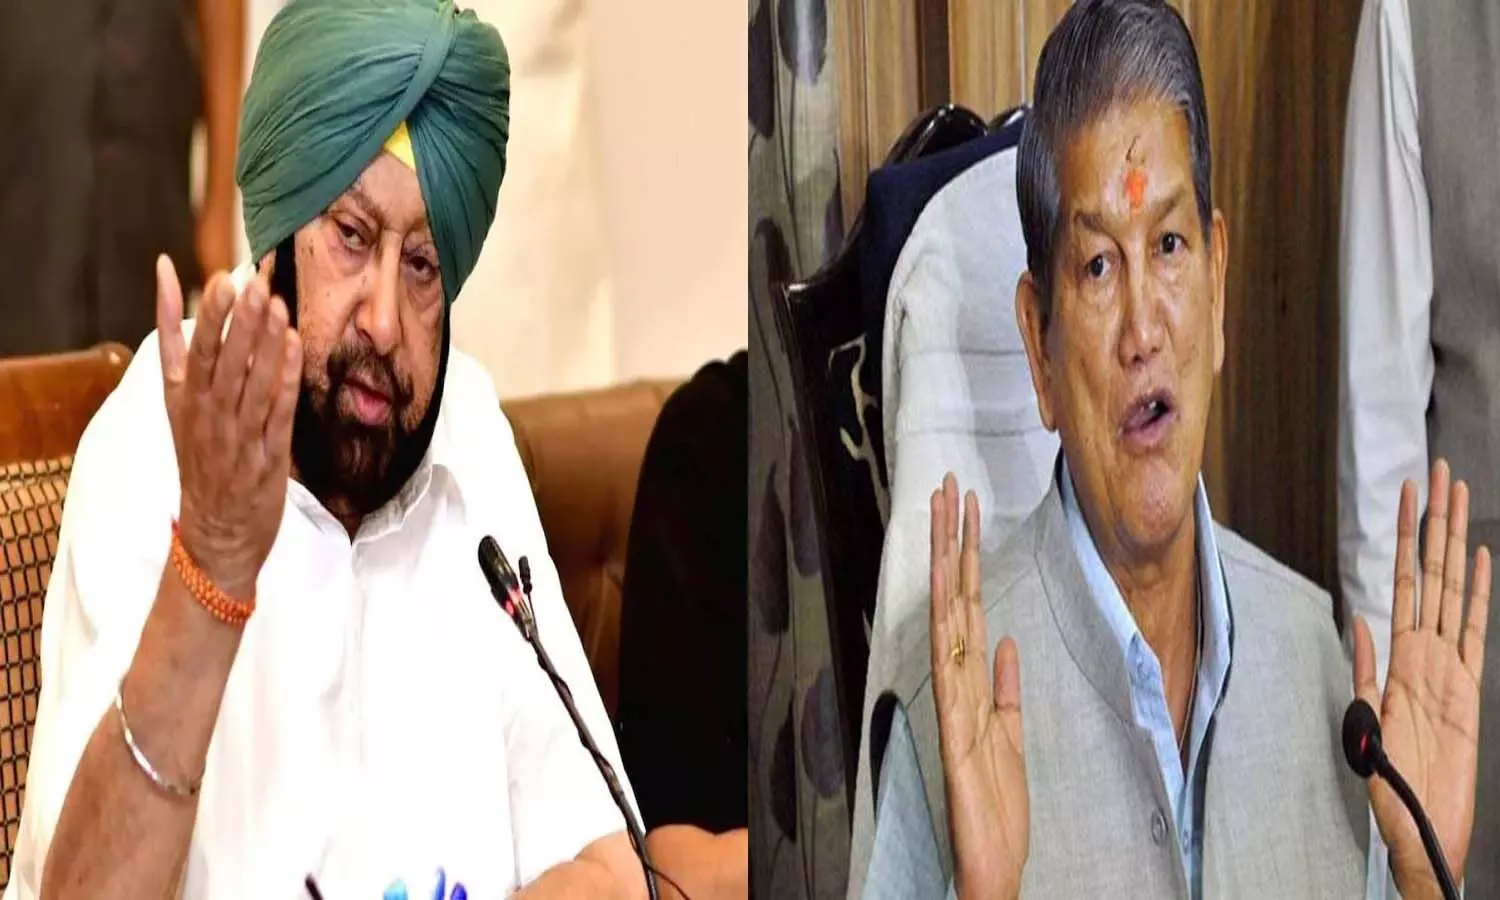 Harish Rawat Case: Now Captain Amarinders entry in Harish Rawat case, you will reap what you sow